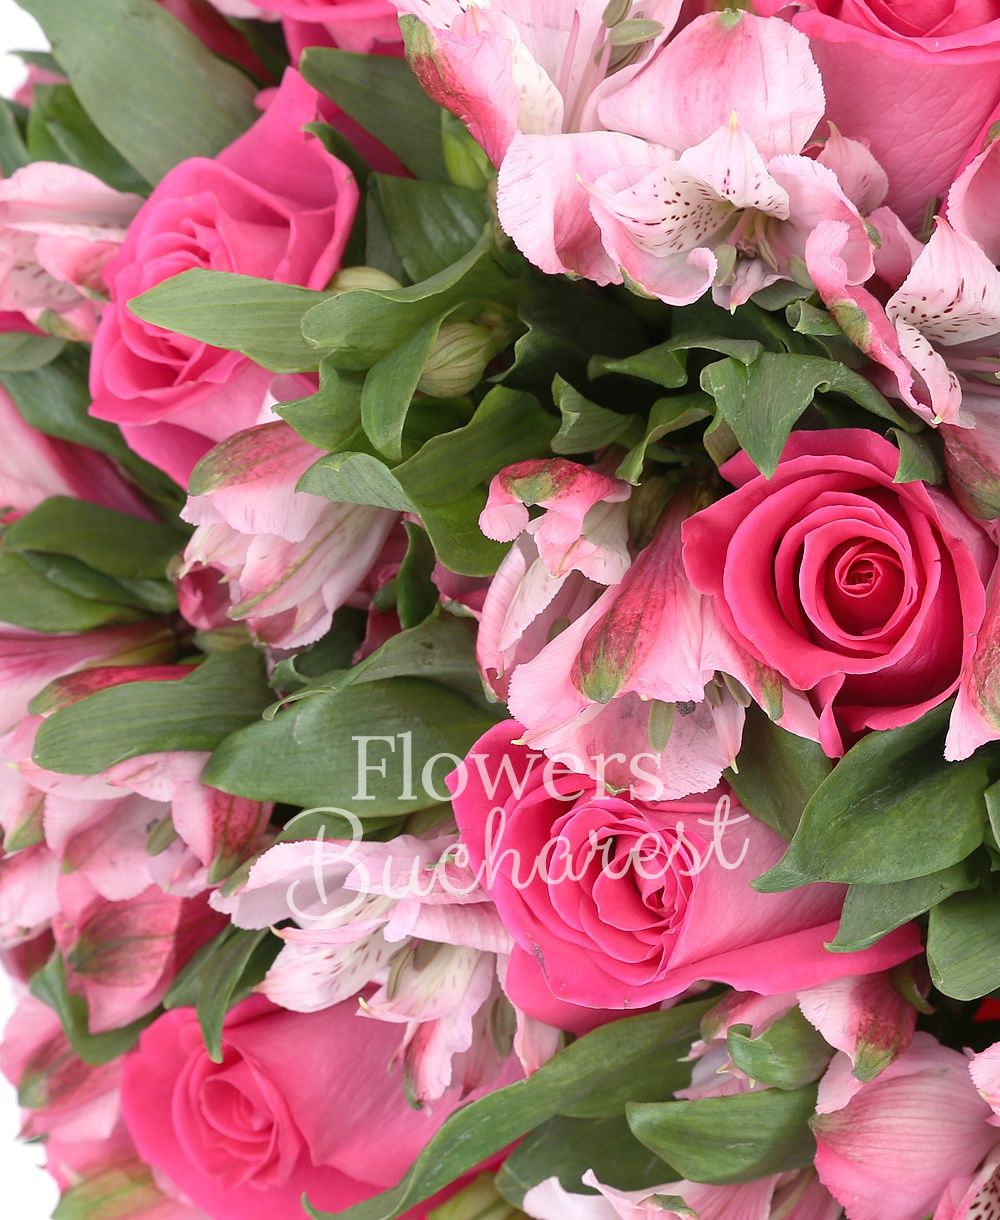 11 cyclam roses, 15 pink alstroemeria